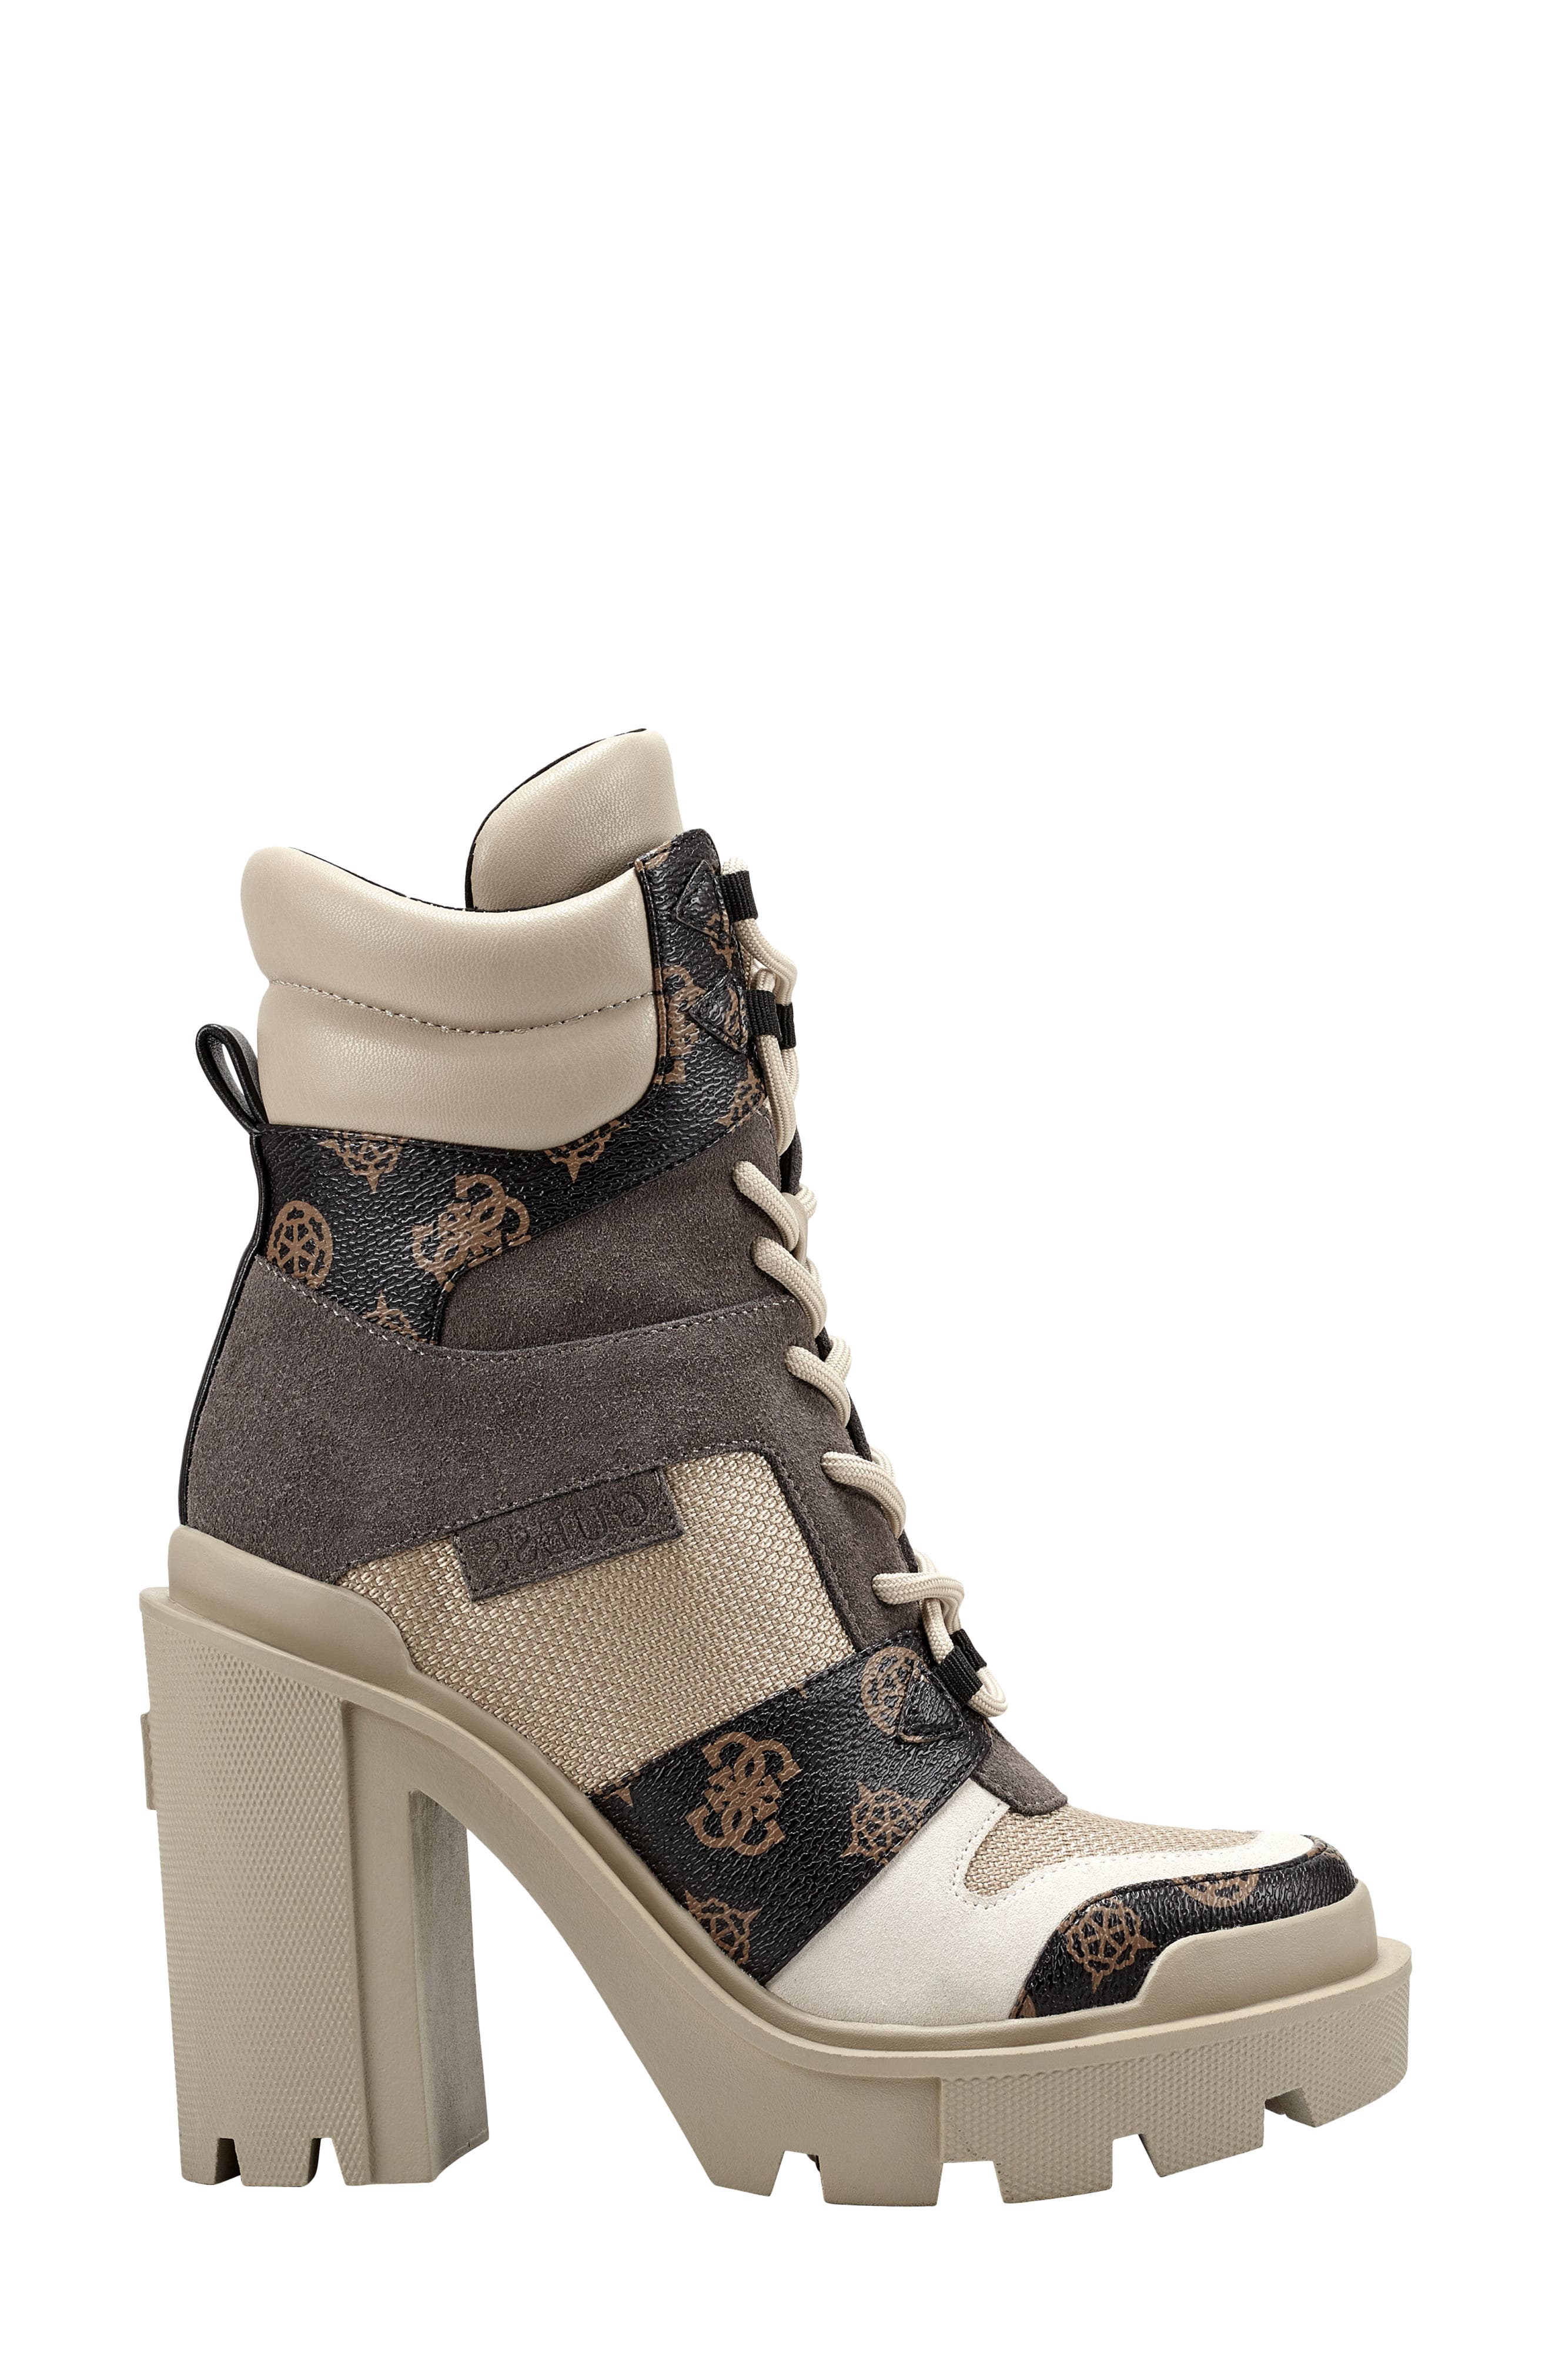 GUESS Women's Ladiva Tall Quilted Boots - Macy's